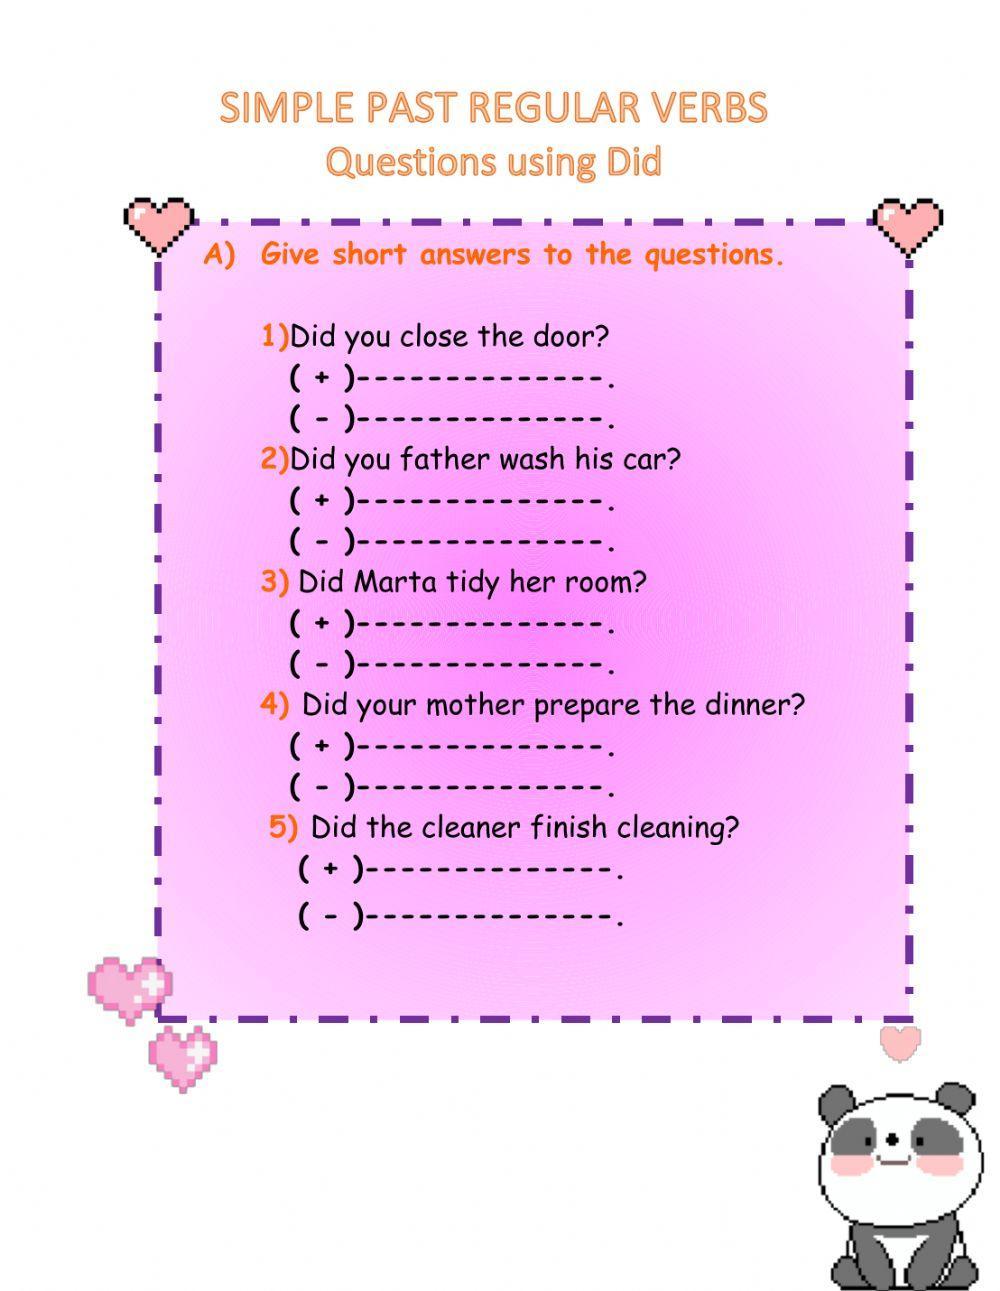 Past tense questions using did